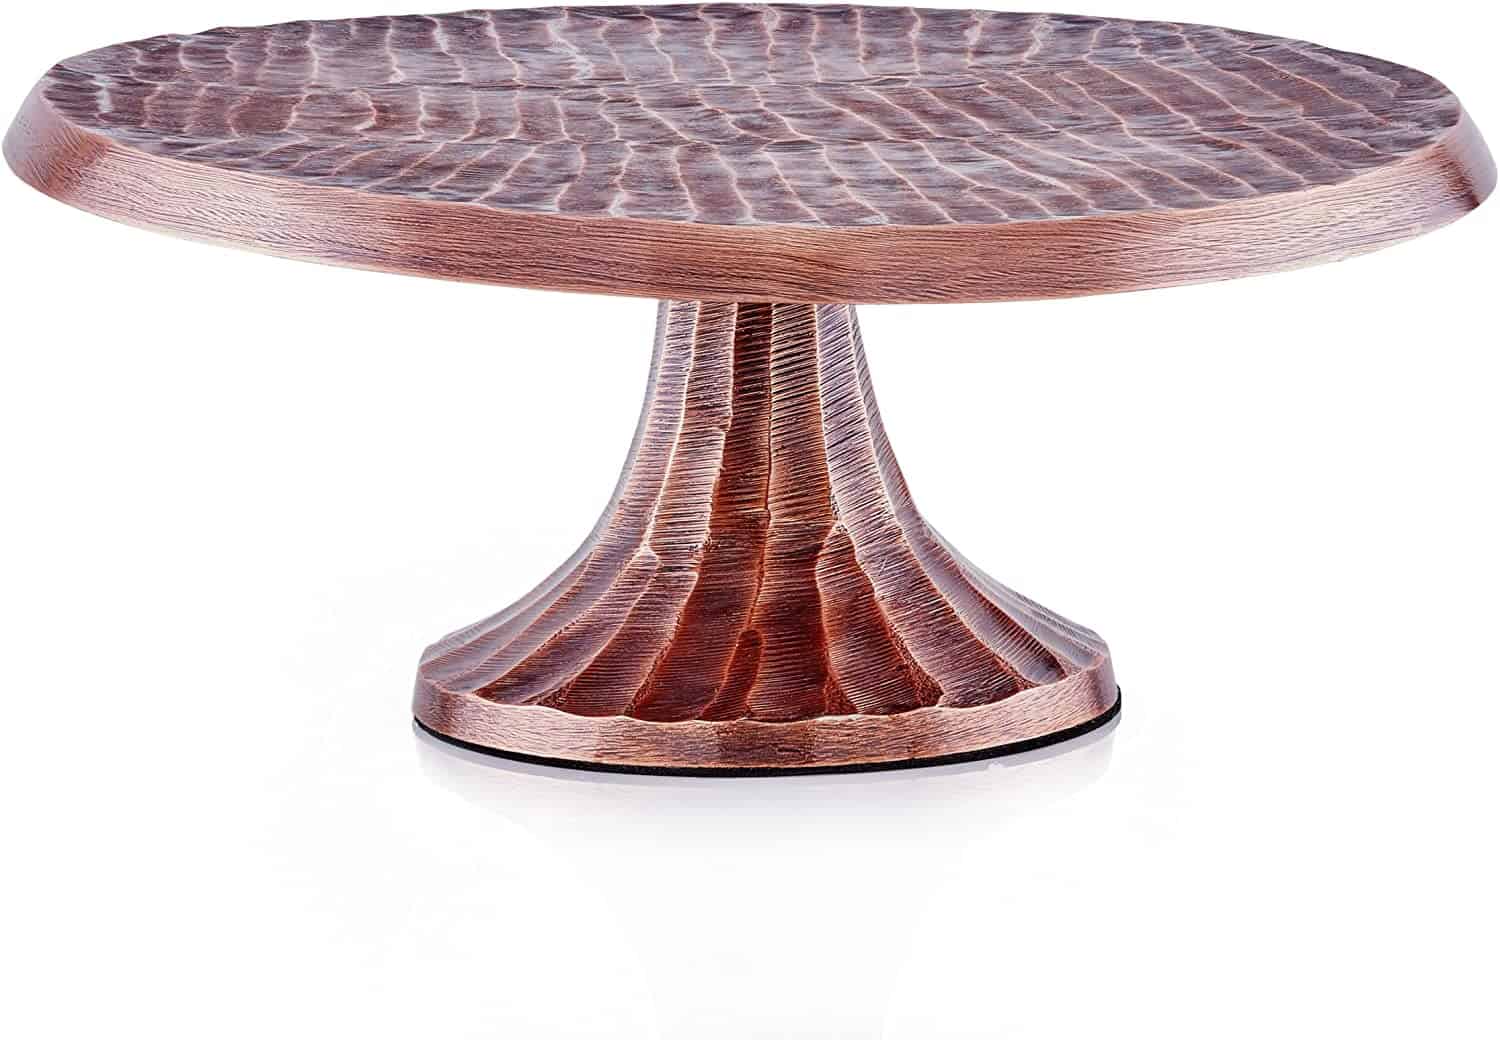 hammered copper look cake stand